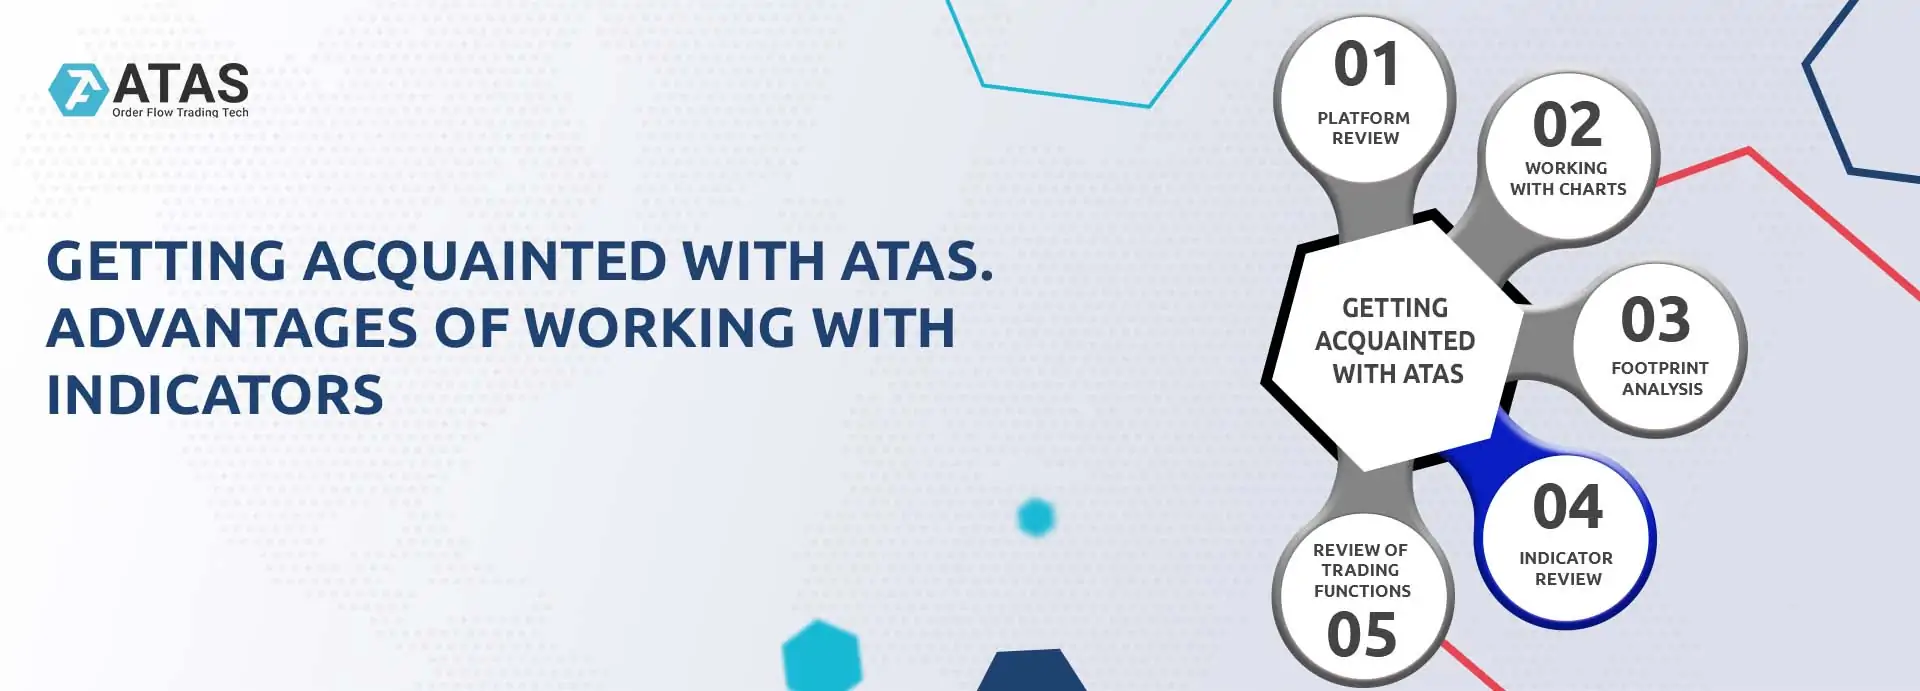 Getting acquainted with ATAS. Advantages of working with indicators